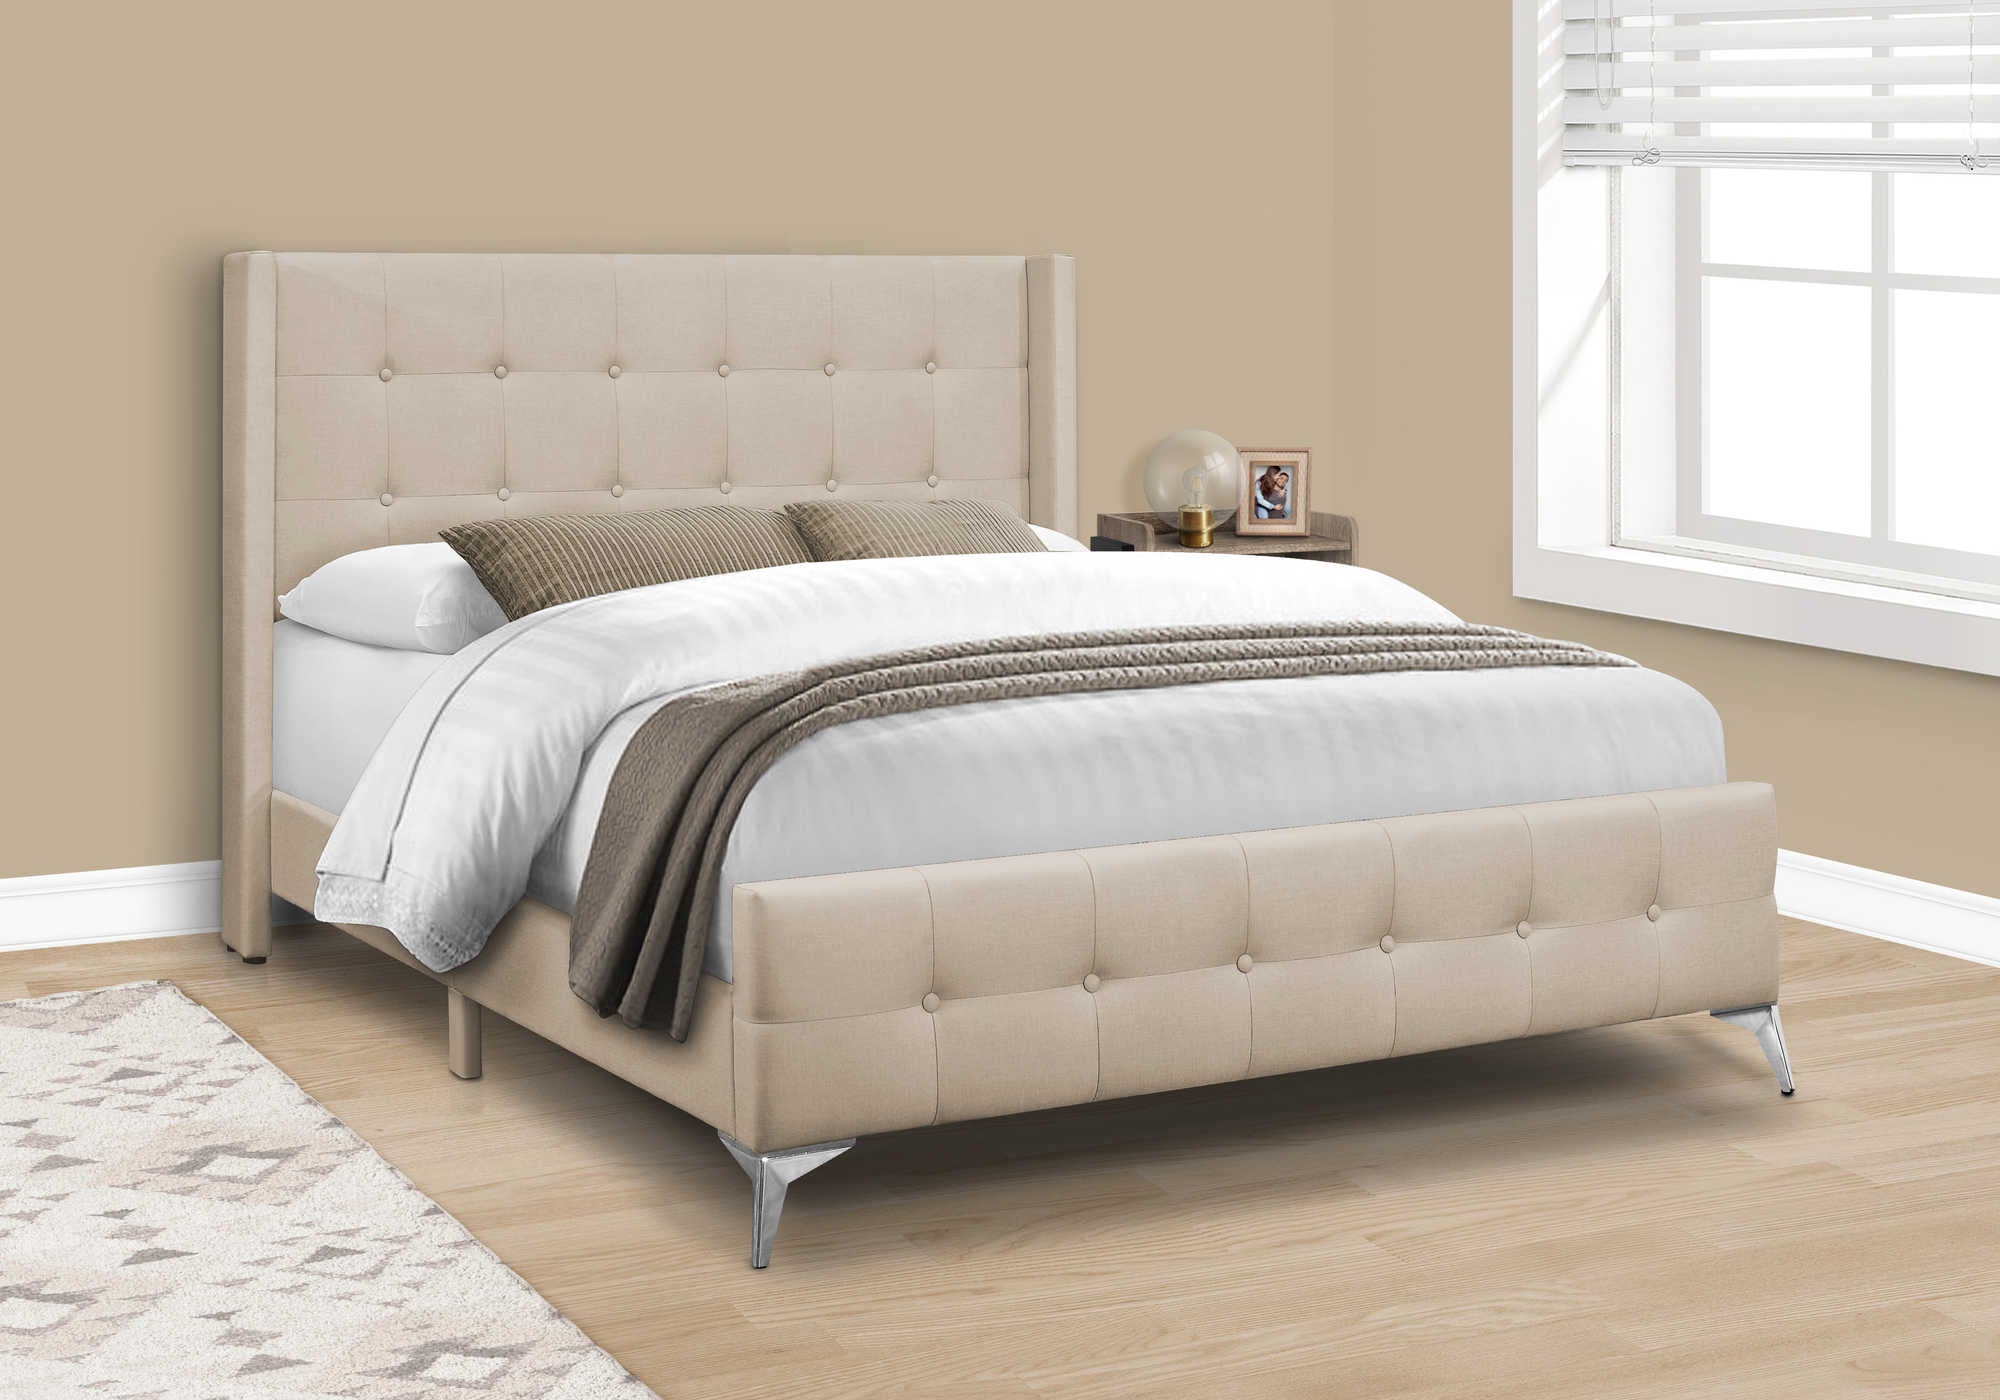 I 6041Q - BED - QUEEN SIZE / BEIGE LINEN WITH CHROME METAL LEGS BY MONARCH SPECIALTIES INC